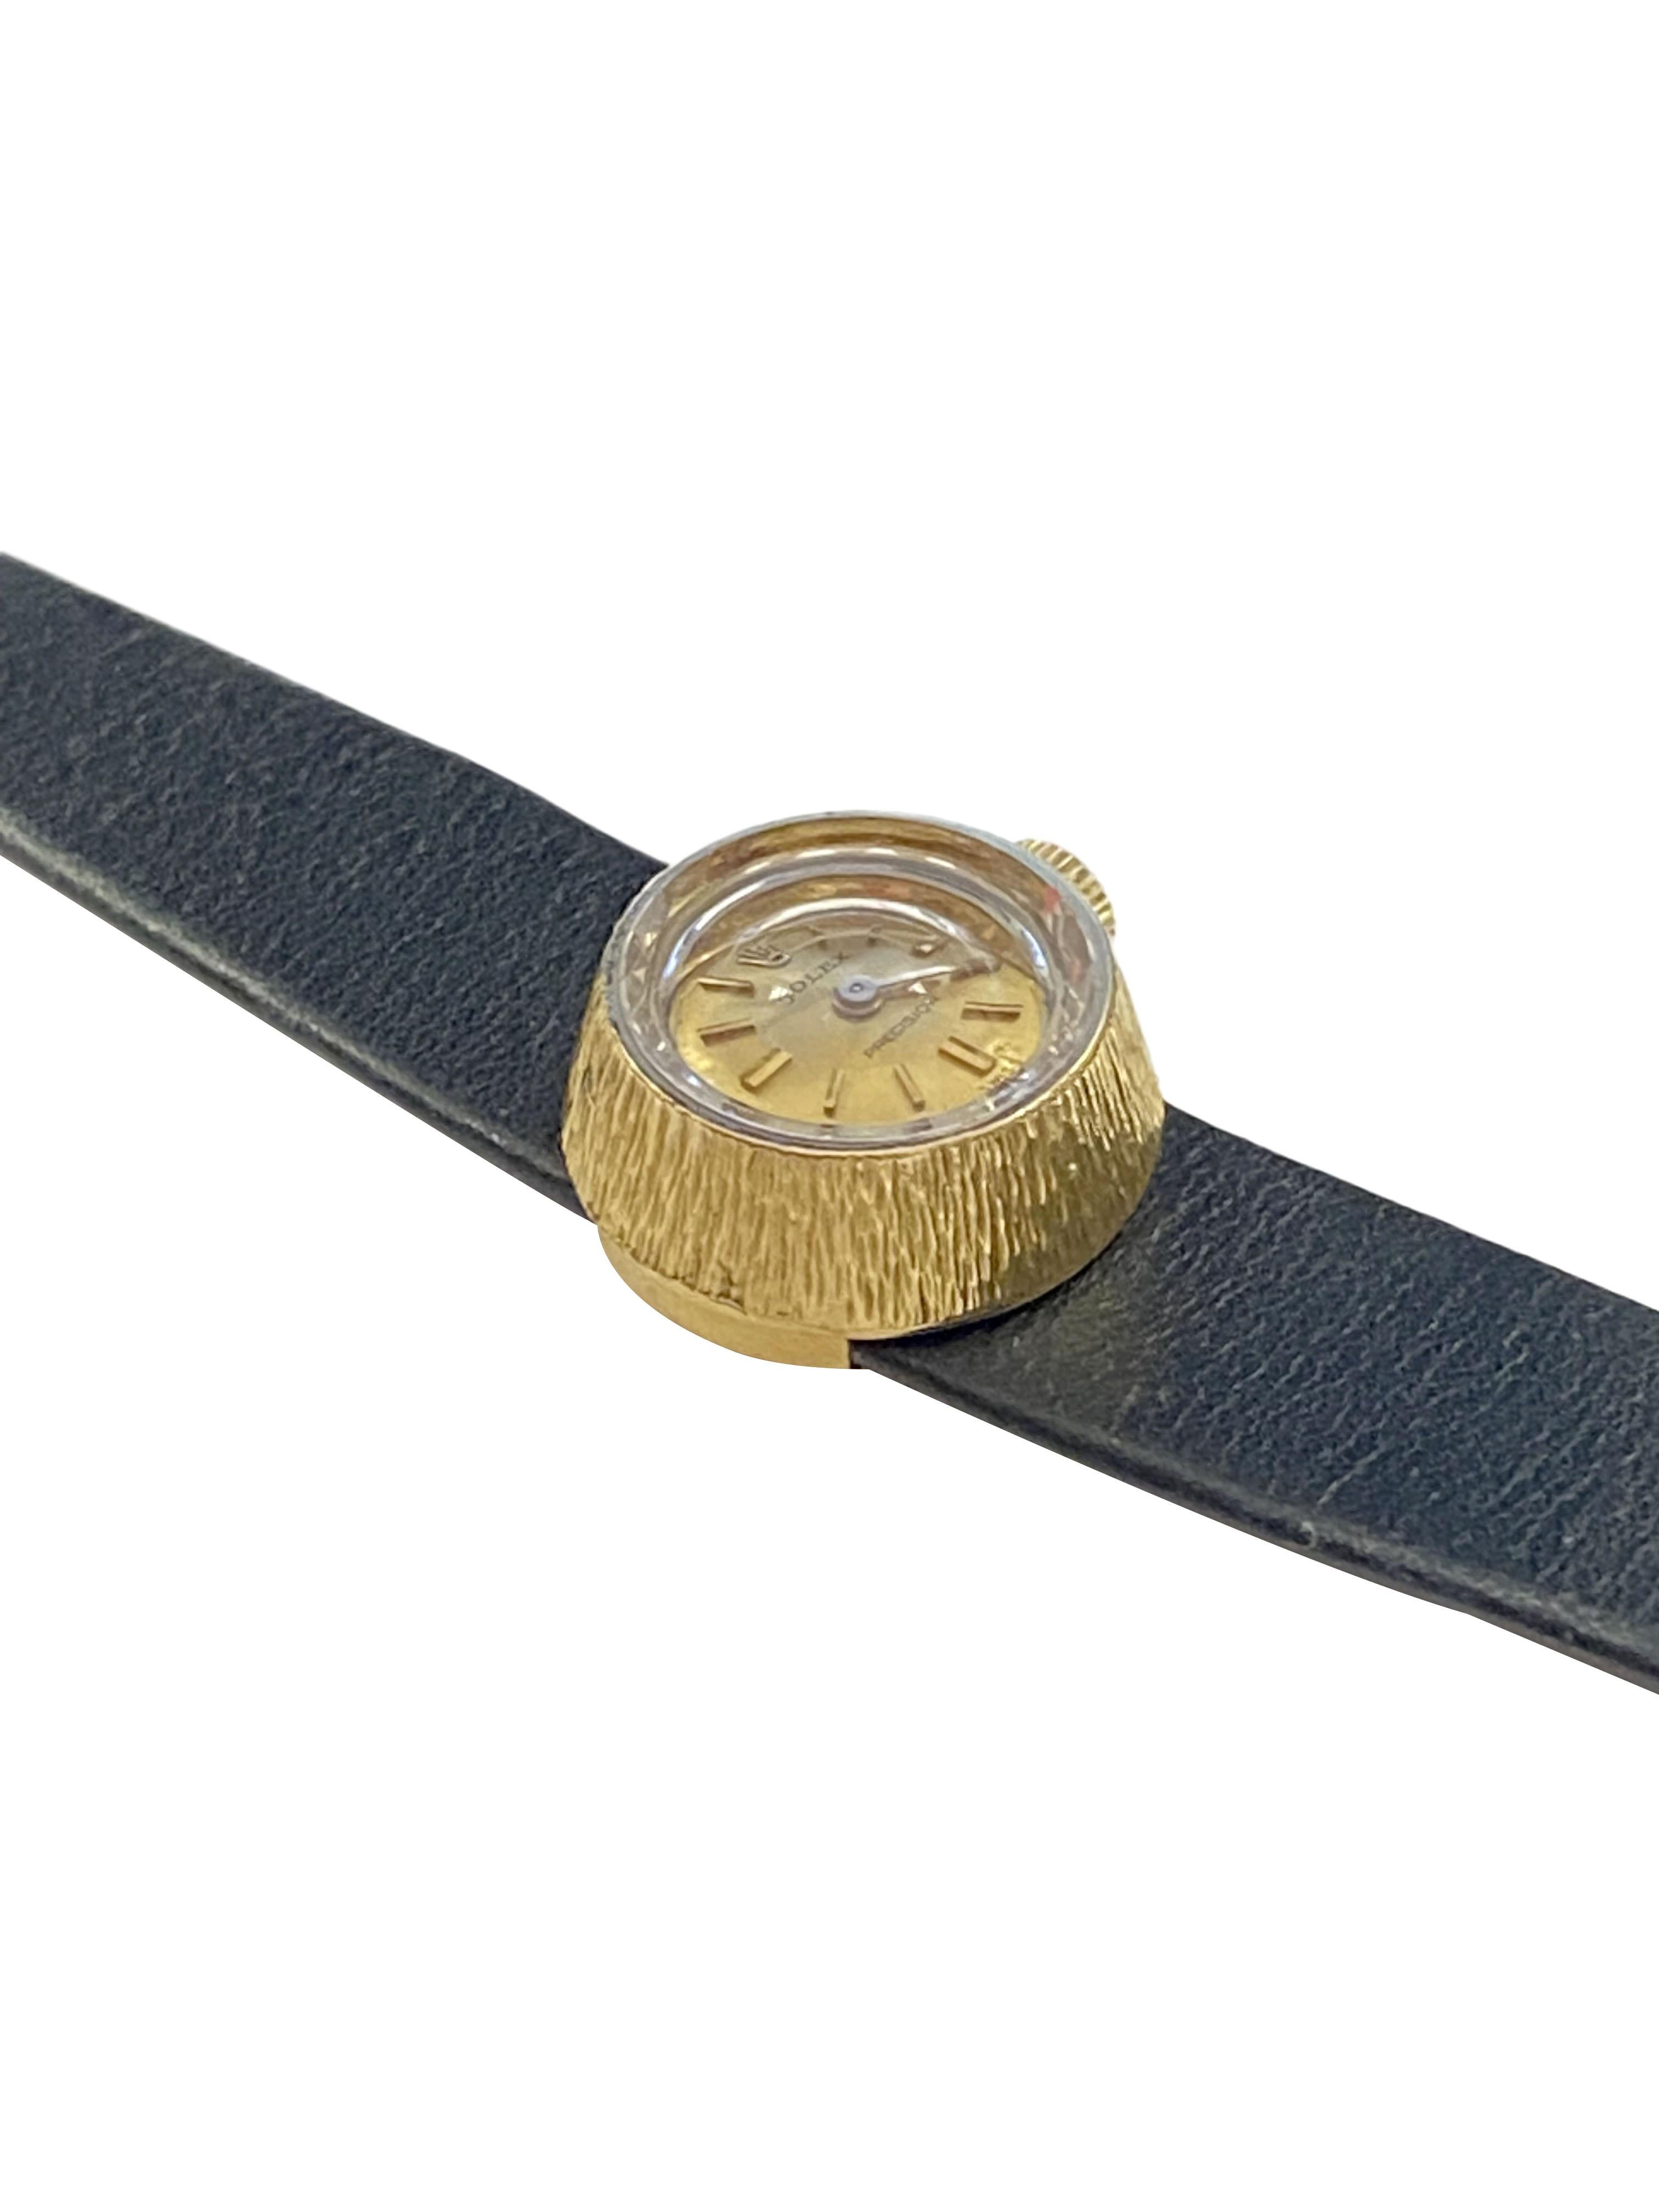 Circa 1960 Rolex Orchid Ladies Wrist Watch, 18k Yellow Gold 2 Piece textured case measuring  12 m.m. in Diameter and 8 M.M. thick. 17 Jewel Mechanical, manual wind movement, Gold dial with raised Gold markers. Original Black Leather pull through